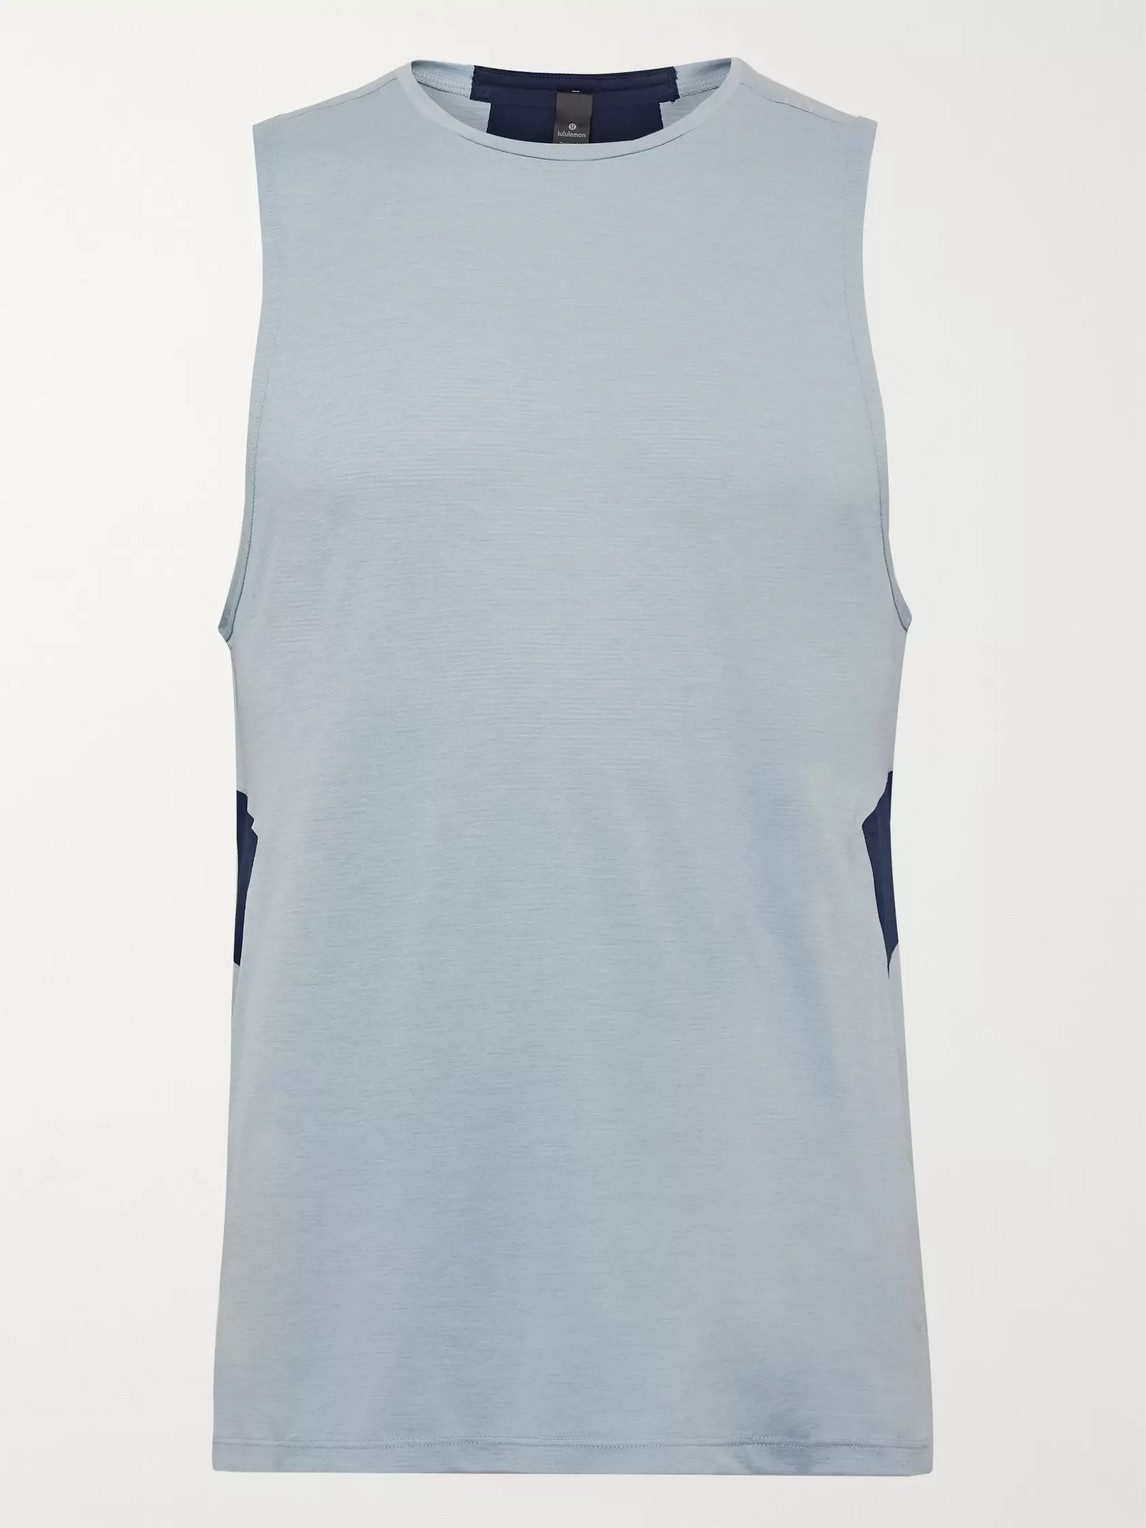 Lululemon Fast And Free Breathe Light Mesh Tank Top In Blue